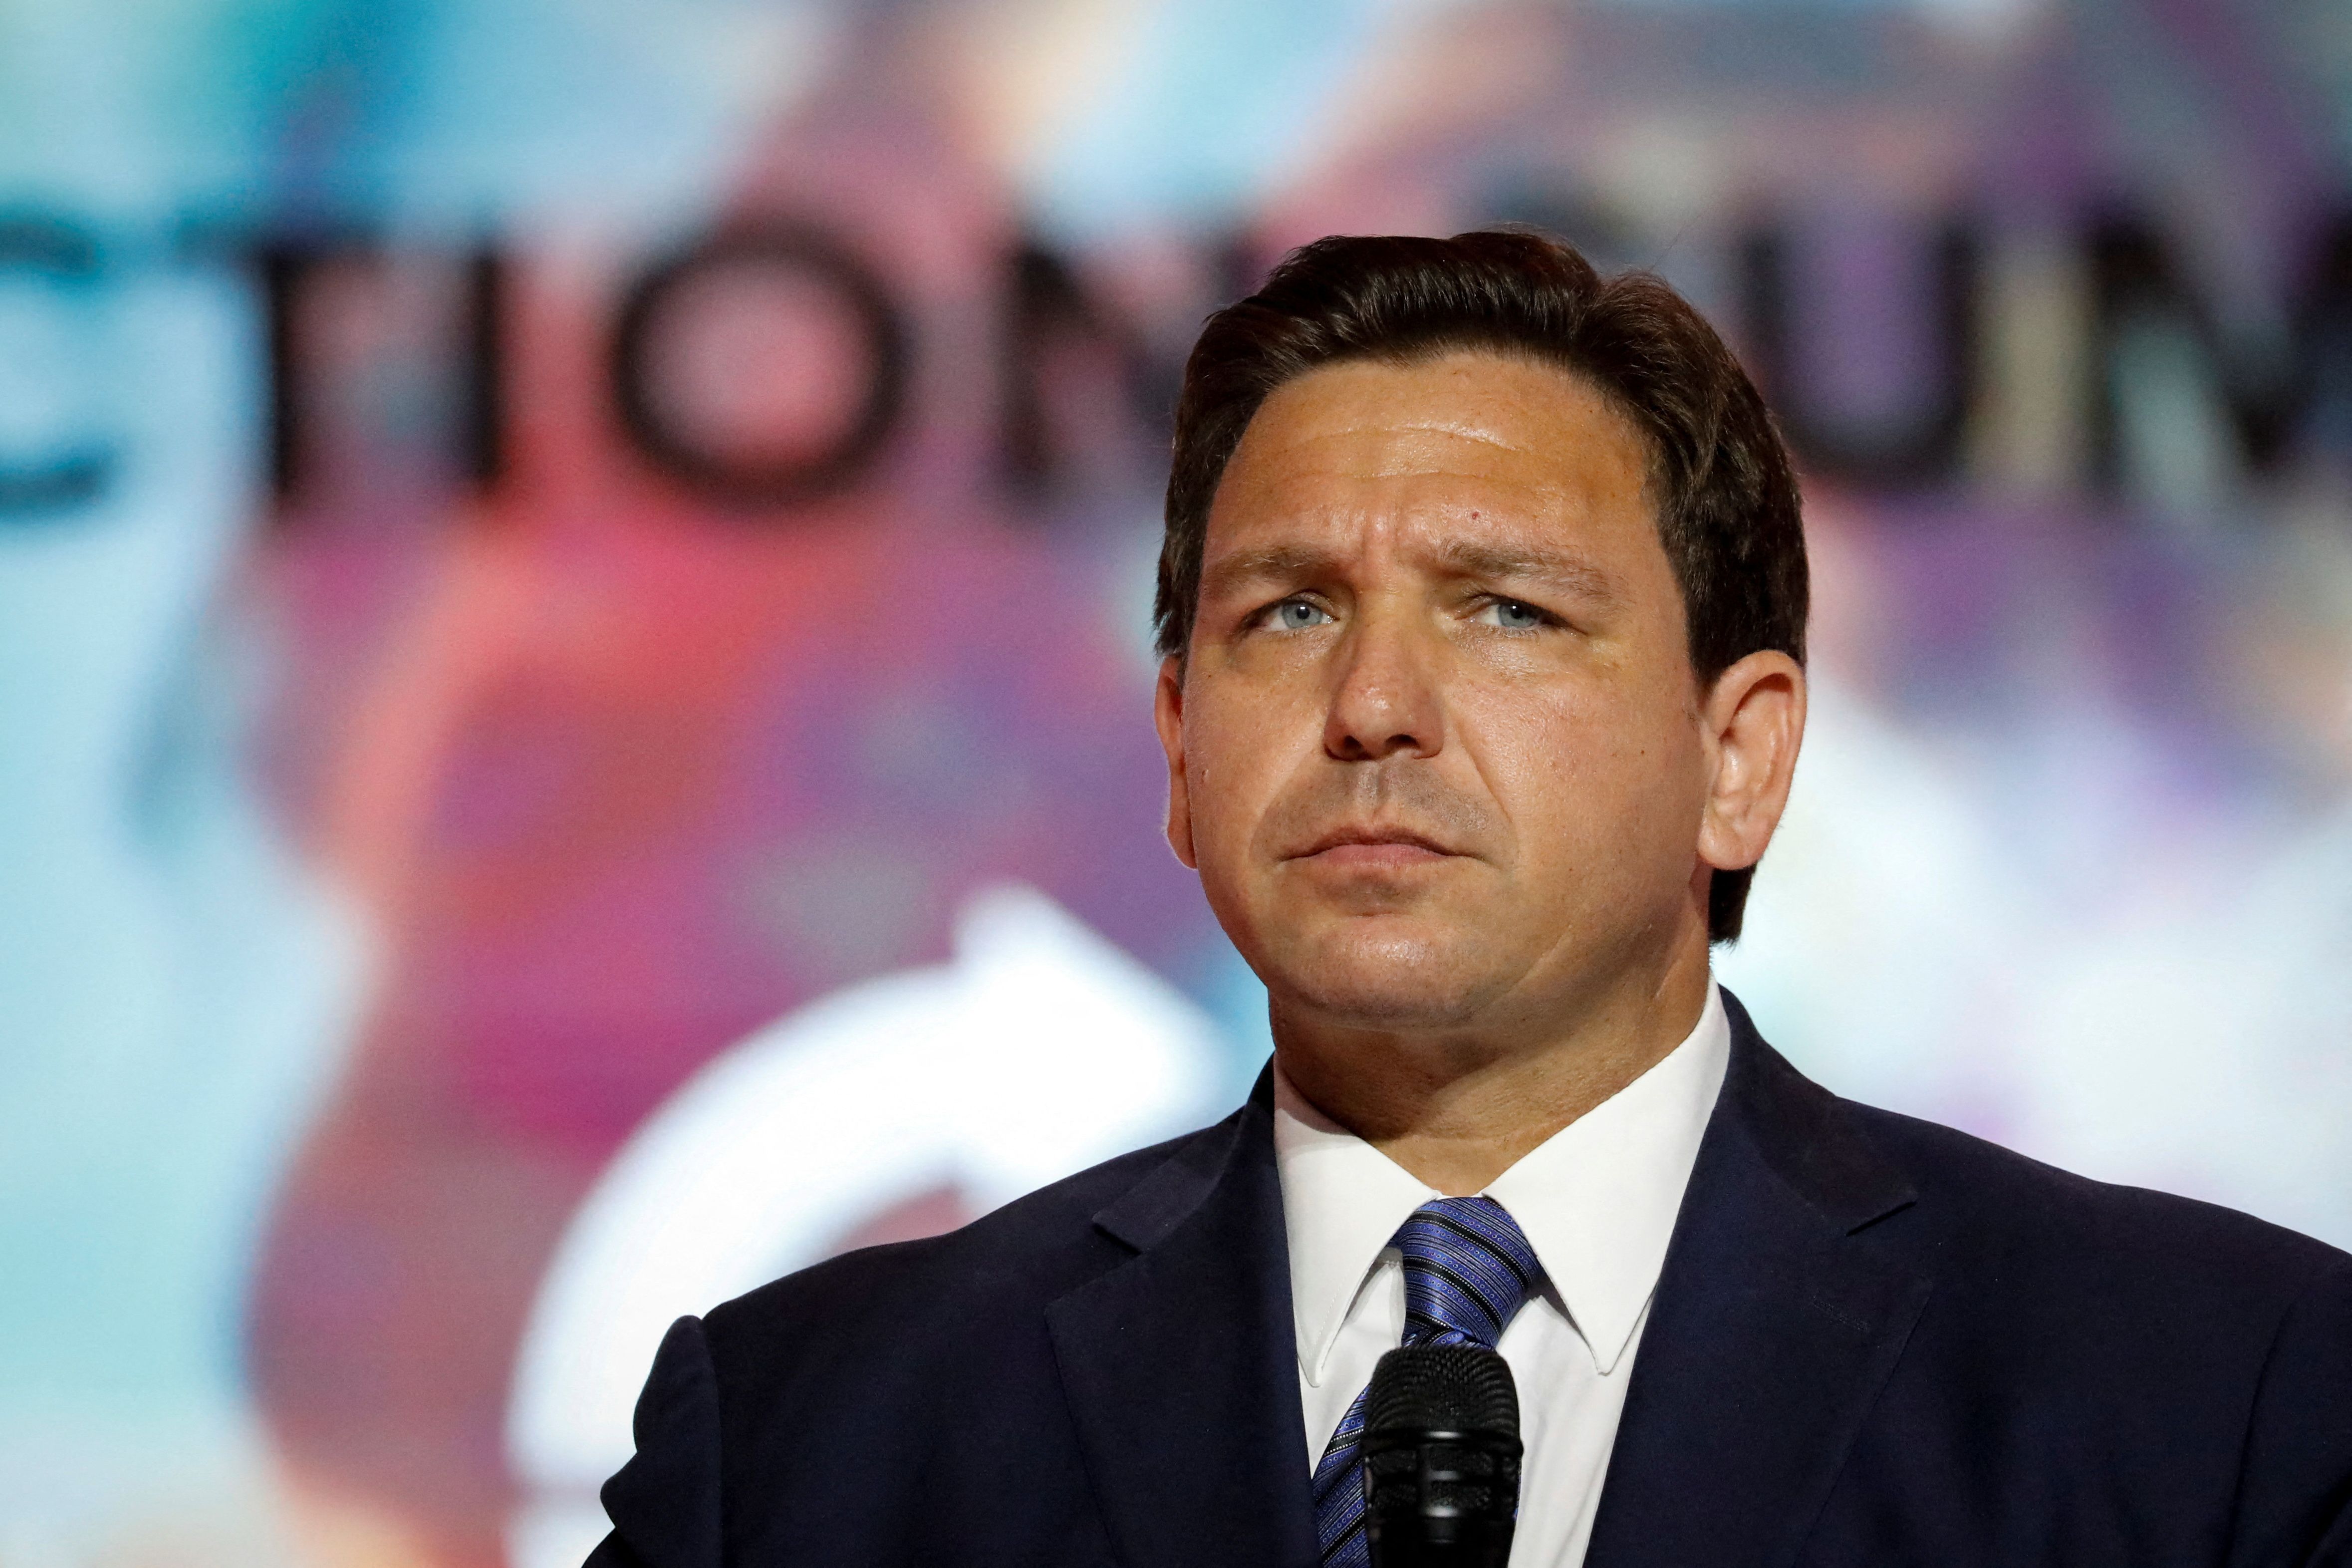 The Orlando Magic spat in the face of Black players by supporting Ron  DeSantis, Orlando Magic